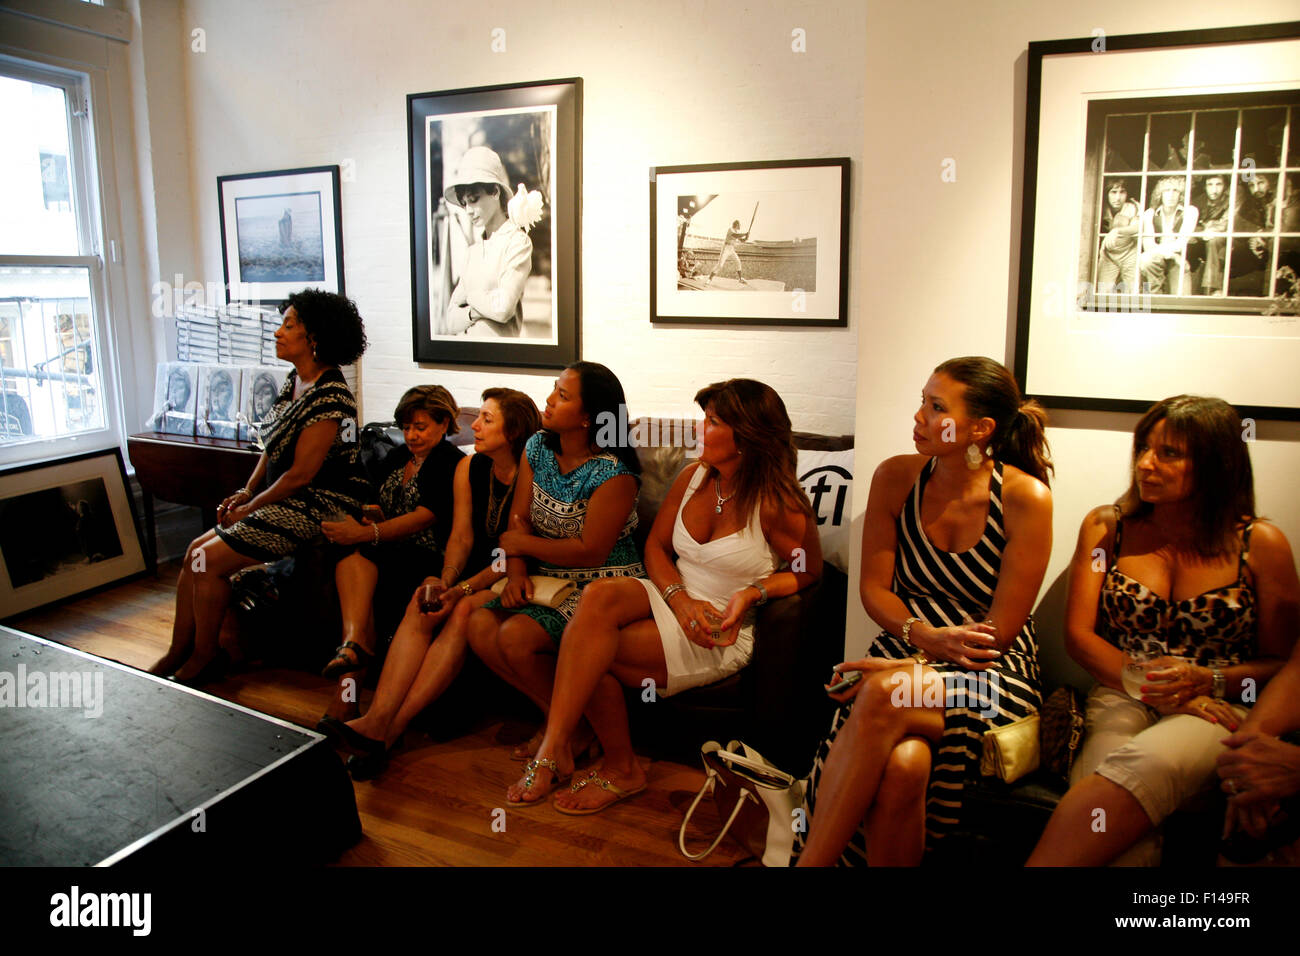 New York, USA. 26th August, 2015. Audience listens to a conversation between Tennis legend Billie Jean King and british photographic legend Terry O'Neil during a reception at New York's Morrison Hotel Gallery in Soho on August 27th, 2015.   The event sponsored by Citibank was to promote a show and book by O'Neil who photographed King and other celebrities extensively in the 1970's and 80's.  Images of celebrities photographed by O'Neil, including Audrey Hepburn, Elton John and The Who, hang above the audience, Credit:  Adam Stoltman/Alamy Live News Stock Photo